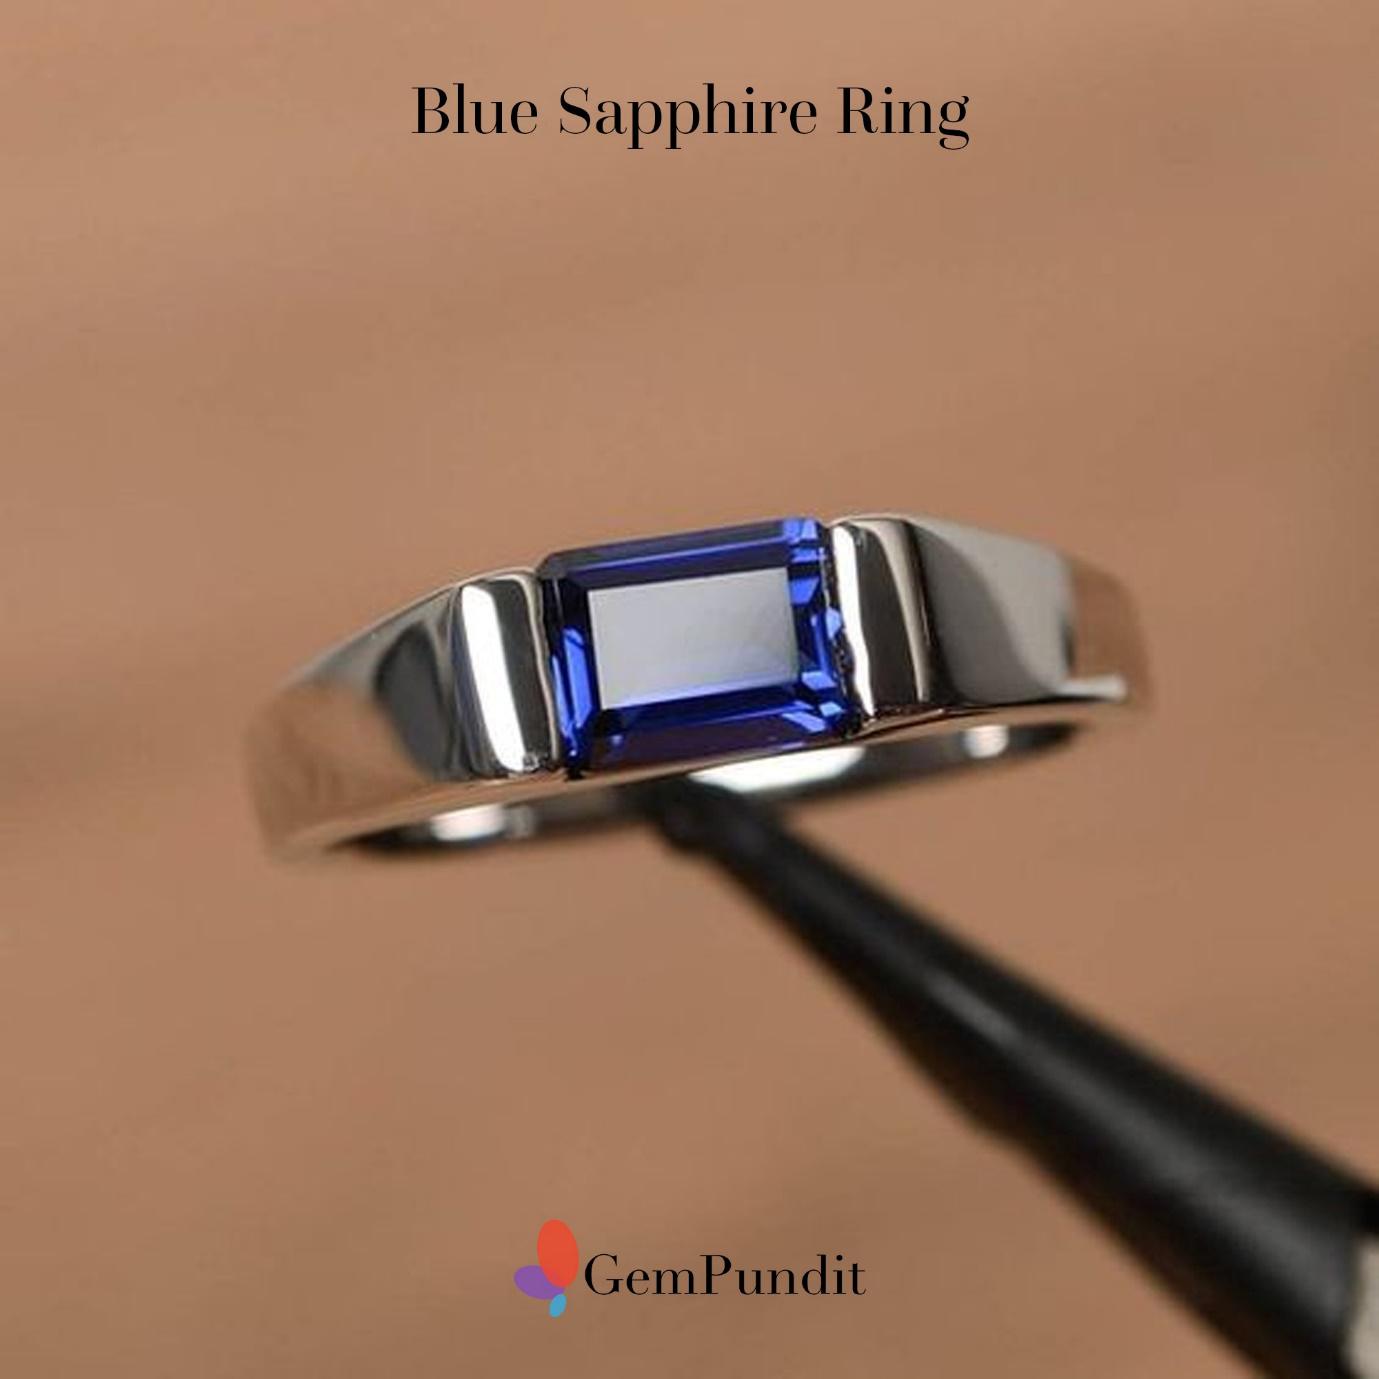 Can blue sapphire be worn in gold? Best metal to wear blue sapphire